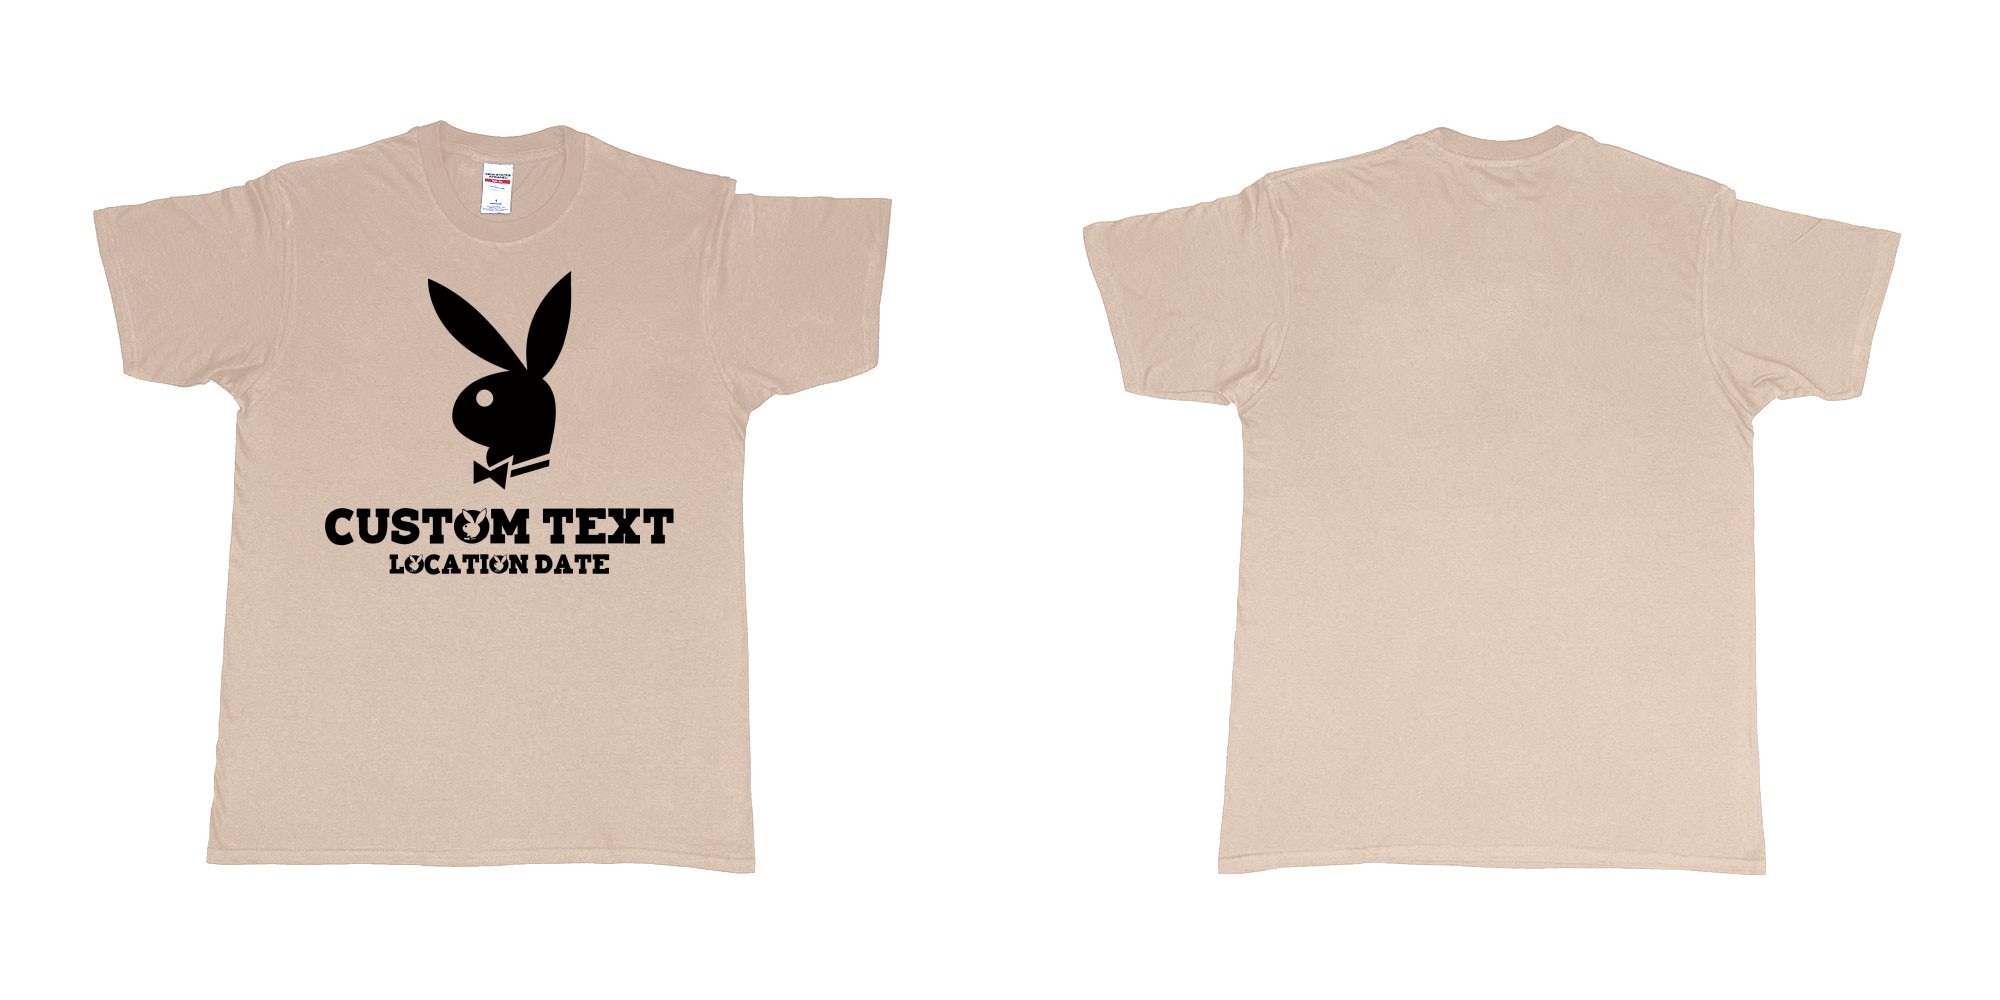 Custom tshirt design playboy playgirl custom text tshirt in fabric color sand choice your own text made in Bali by The Pirate Way